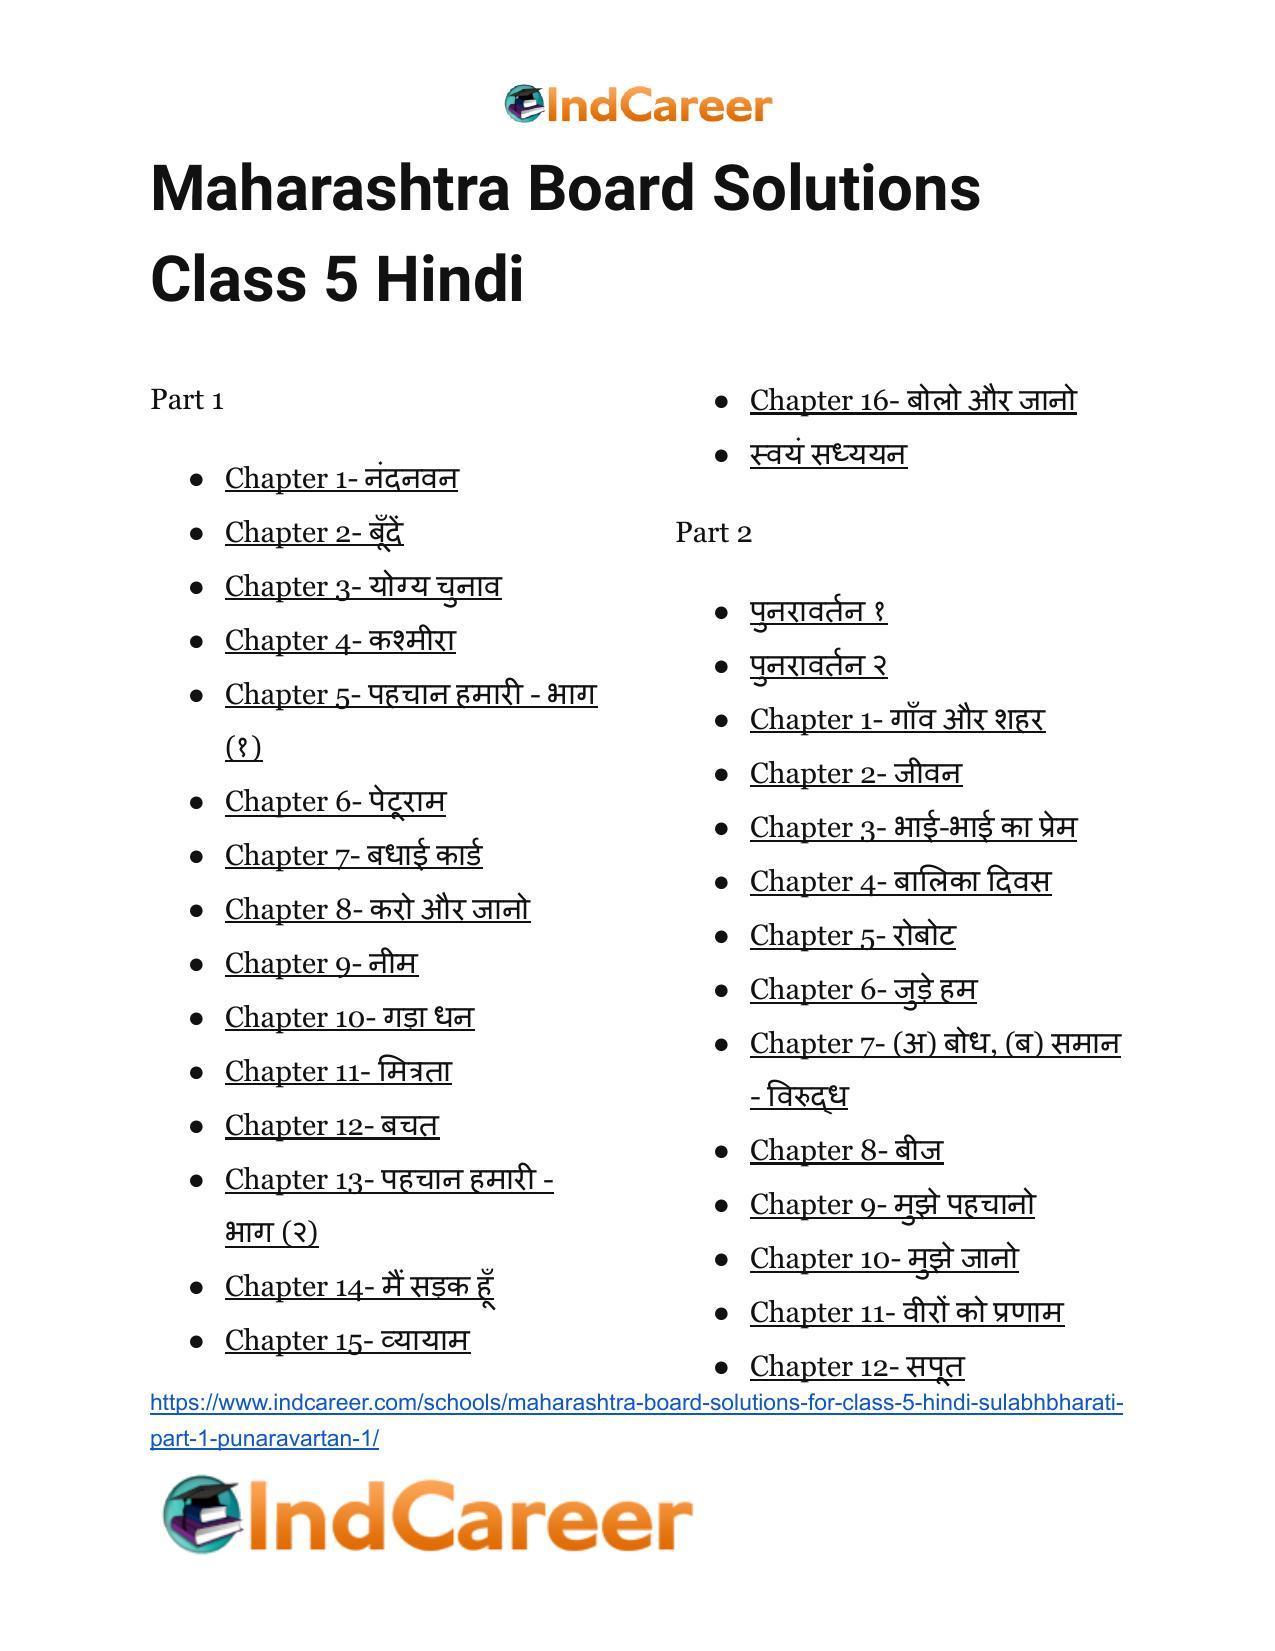 Maharashtra Board Solutions for Class 5- Hindi Sulabhbharati (Part 1): पुनरावर्तन १ - Page 9